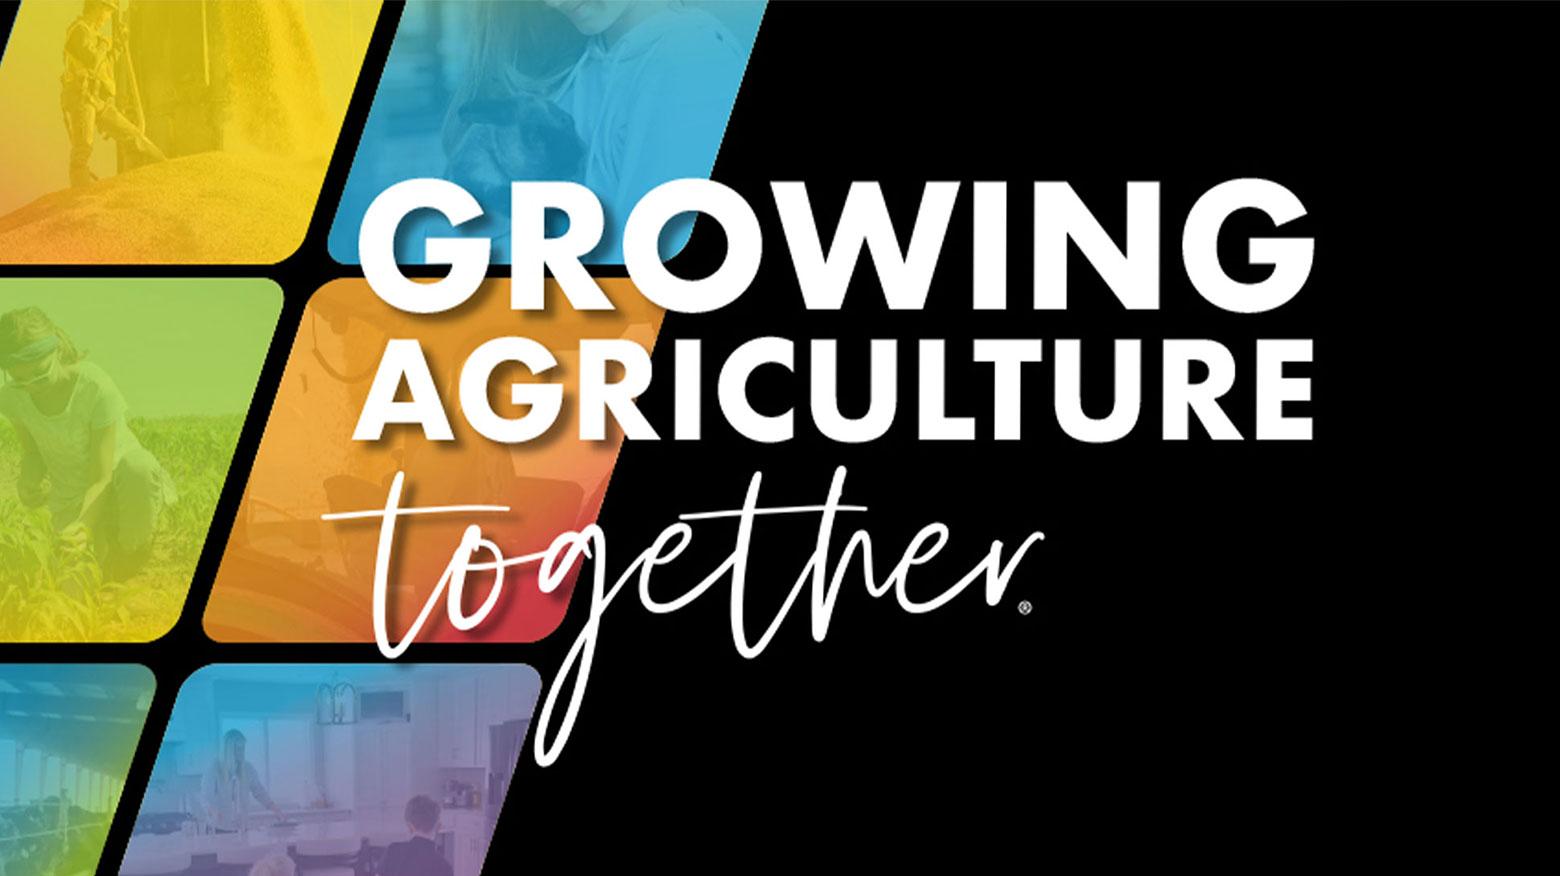 Growing Agriculture Together